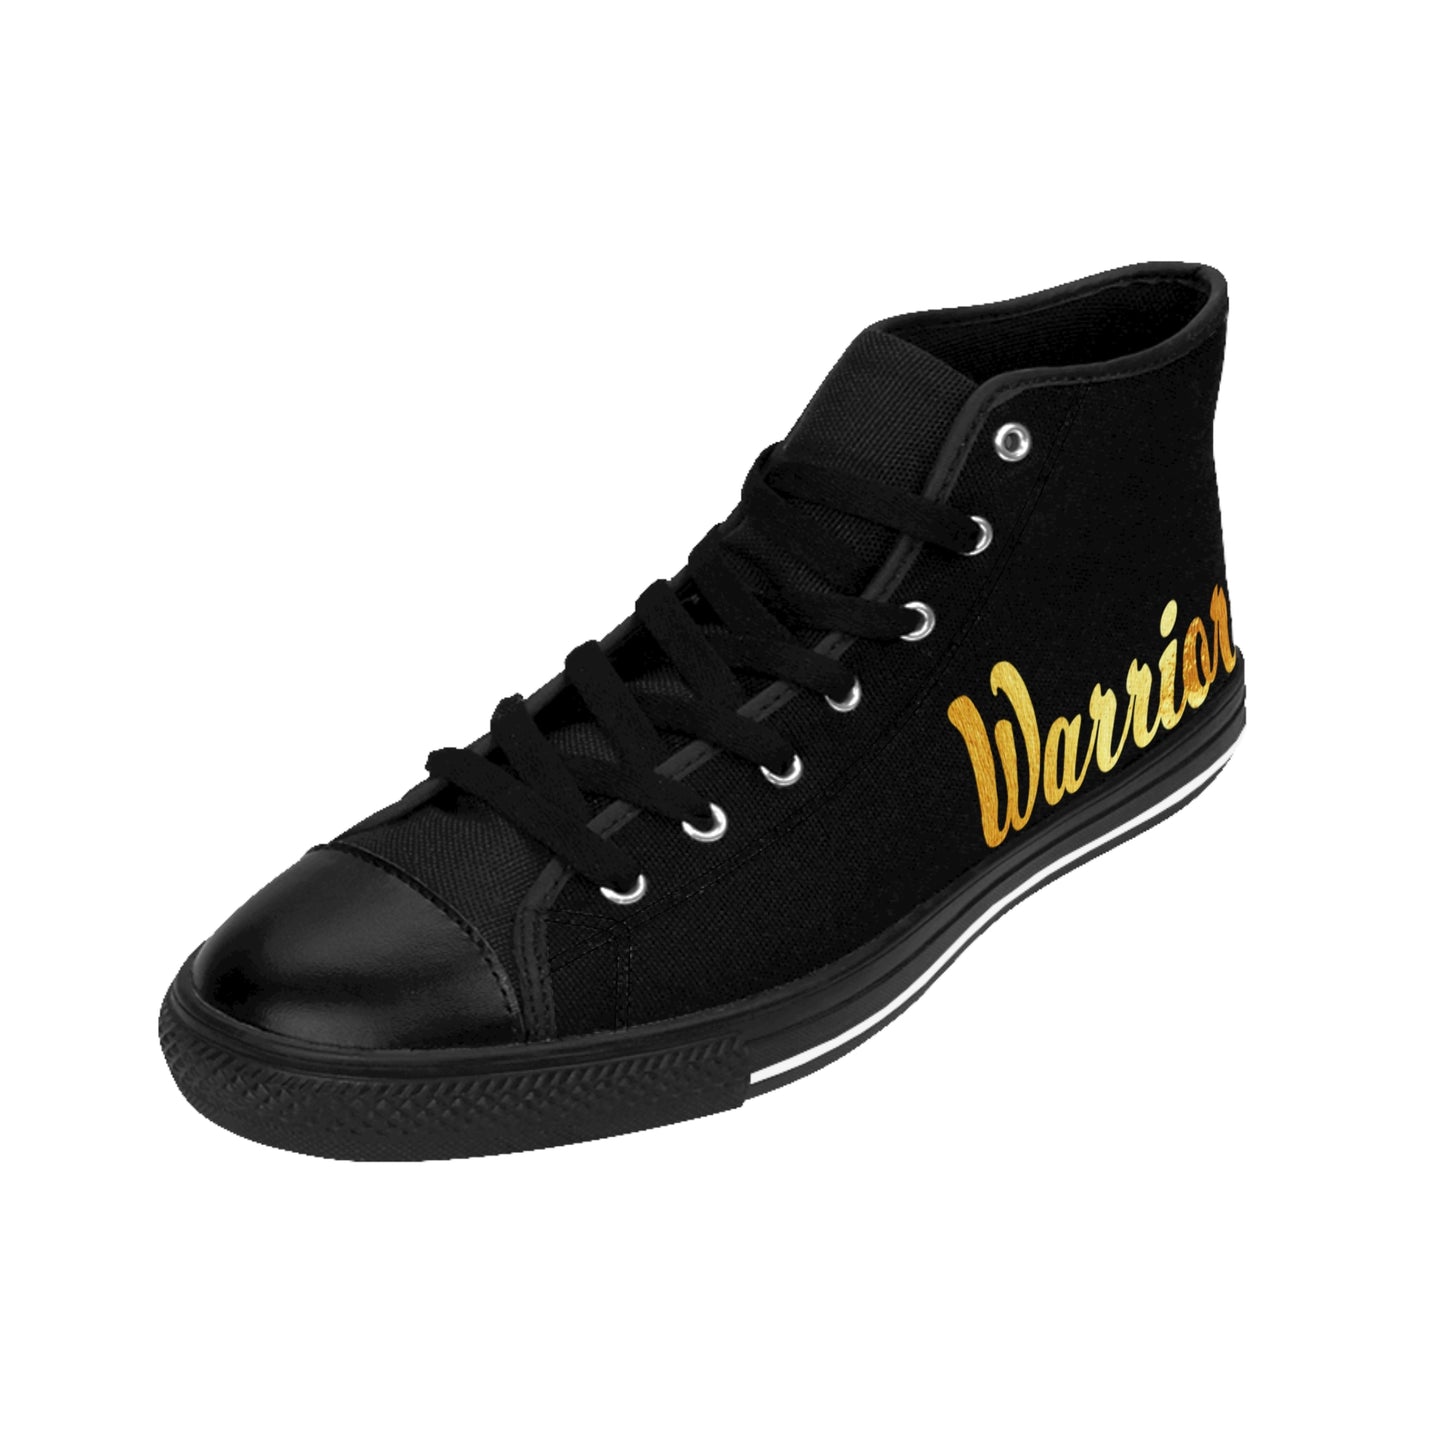 Men's - Gold and Bold Warrior - High-top Sneakers